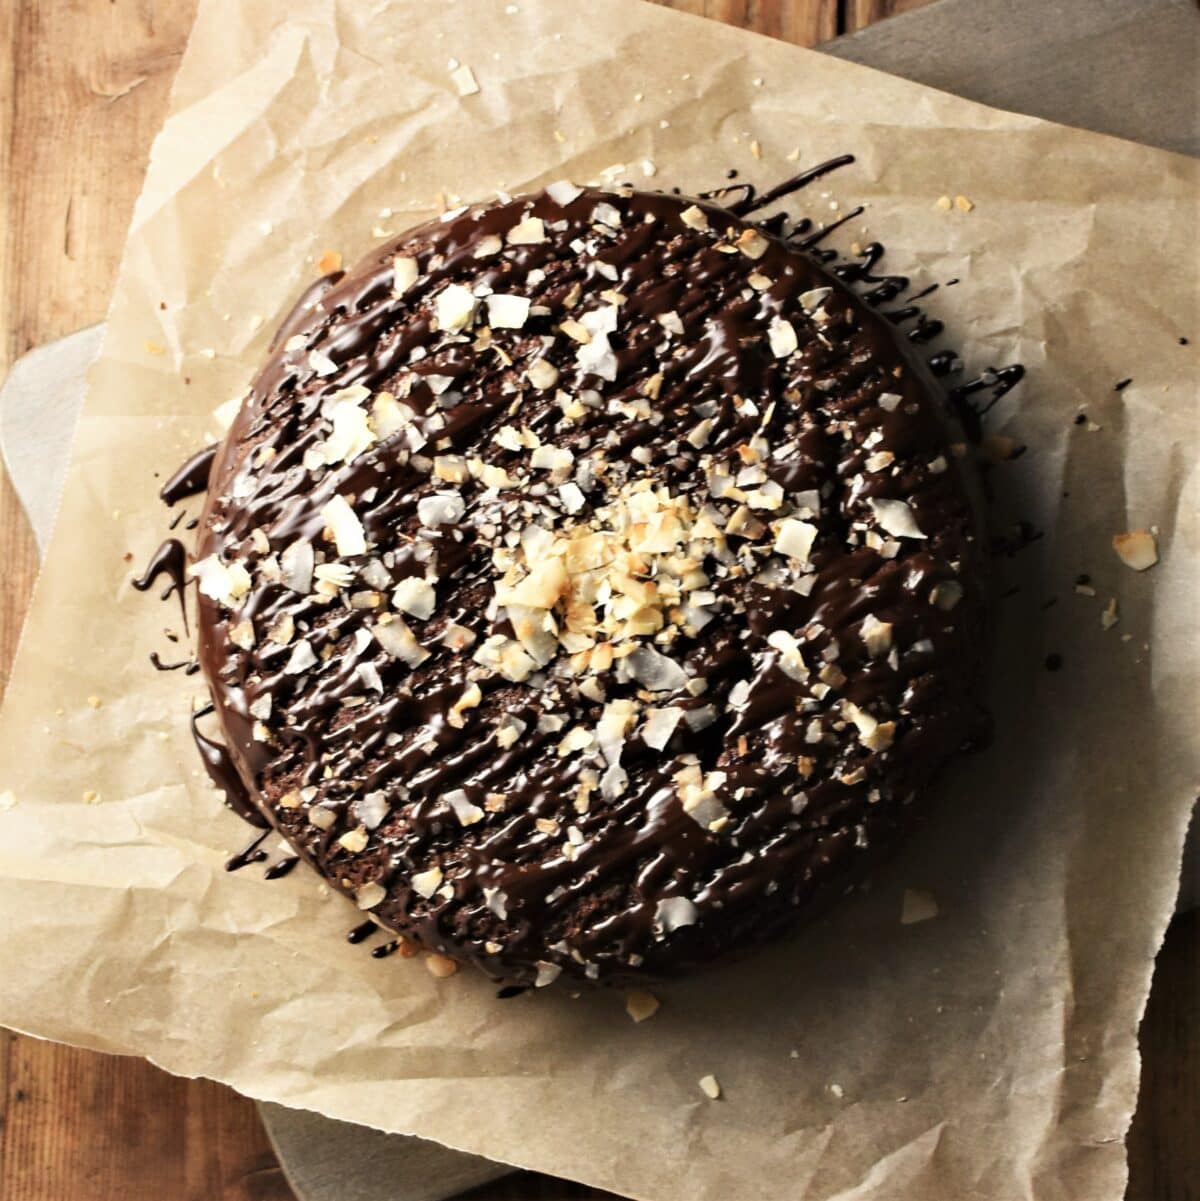 Chocolate cake with chocolate drizzle and coconut flakes on top of paper.